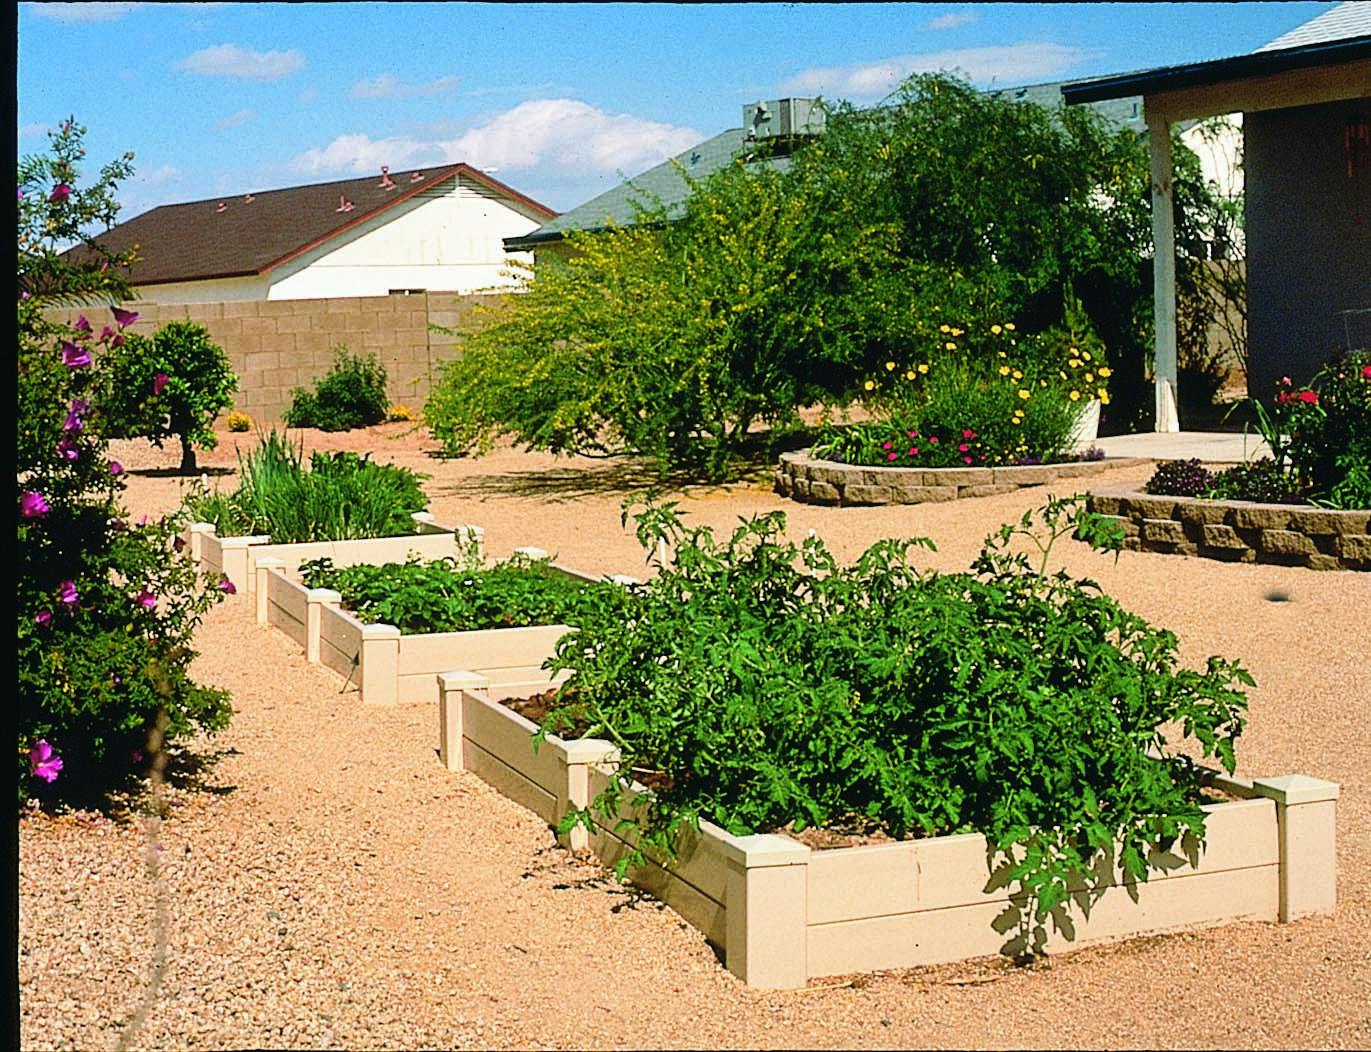 This raised bed planting area is an attractive, water-efficient way to grow vegetables. Like the rest of the yard, it is watered with a drip system.